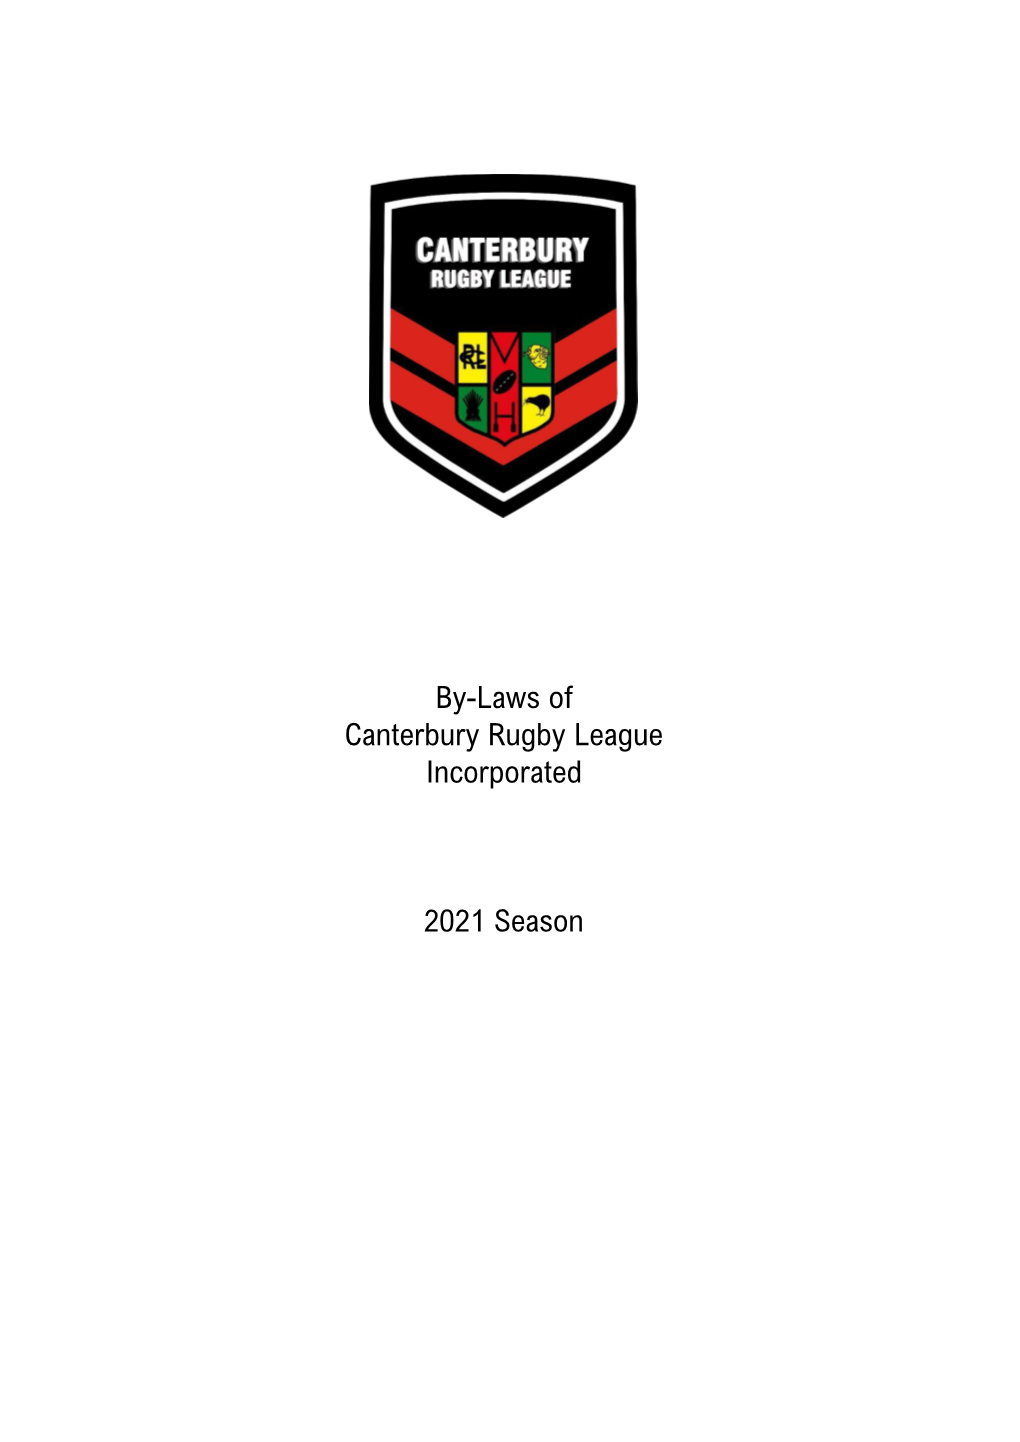 By-Laws of Canterbury Rugby League Incorporated 2021 Season